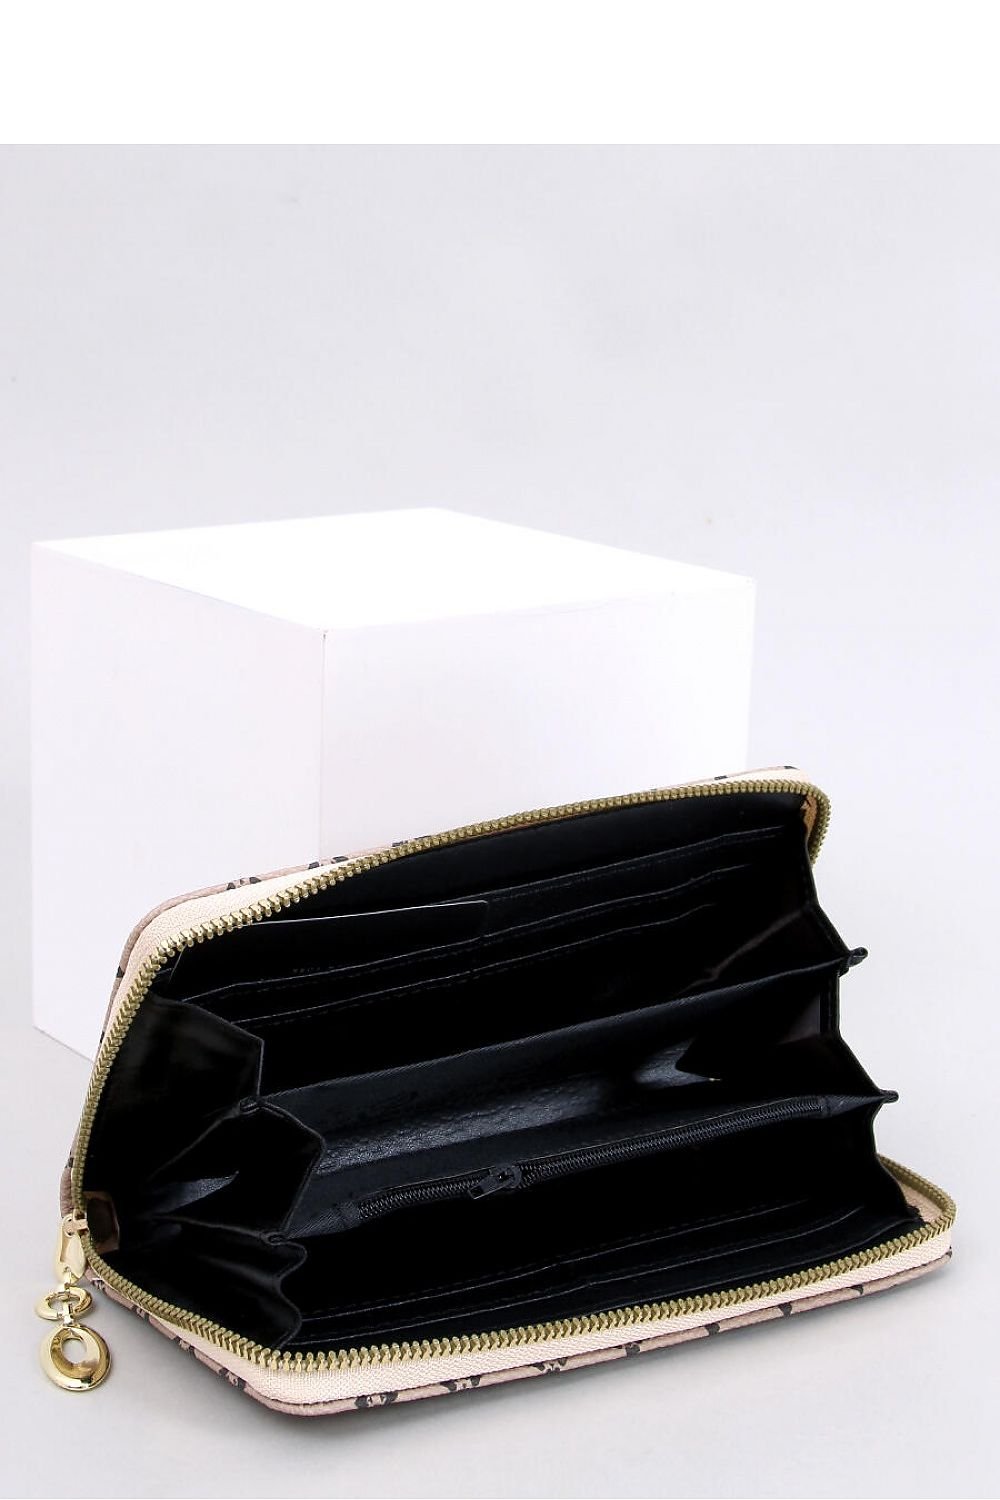 Wallet - M&H FashionWalletM&H FashionM&H Fashion192422_1116814one-size-fits-allWallet InelloM&H FashionM&H FashionWomen's wallet with an additional strap. The stylish design and gold finish will surely steal your hearts : ) It is zippered and has numerous compartments, card tabsWallet